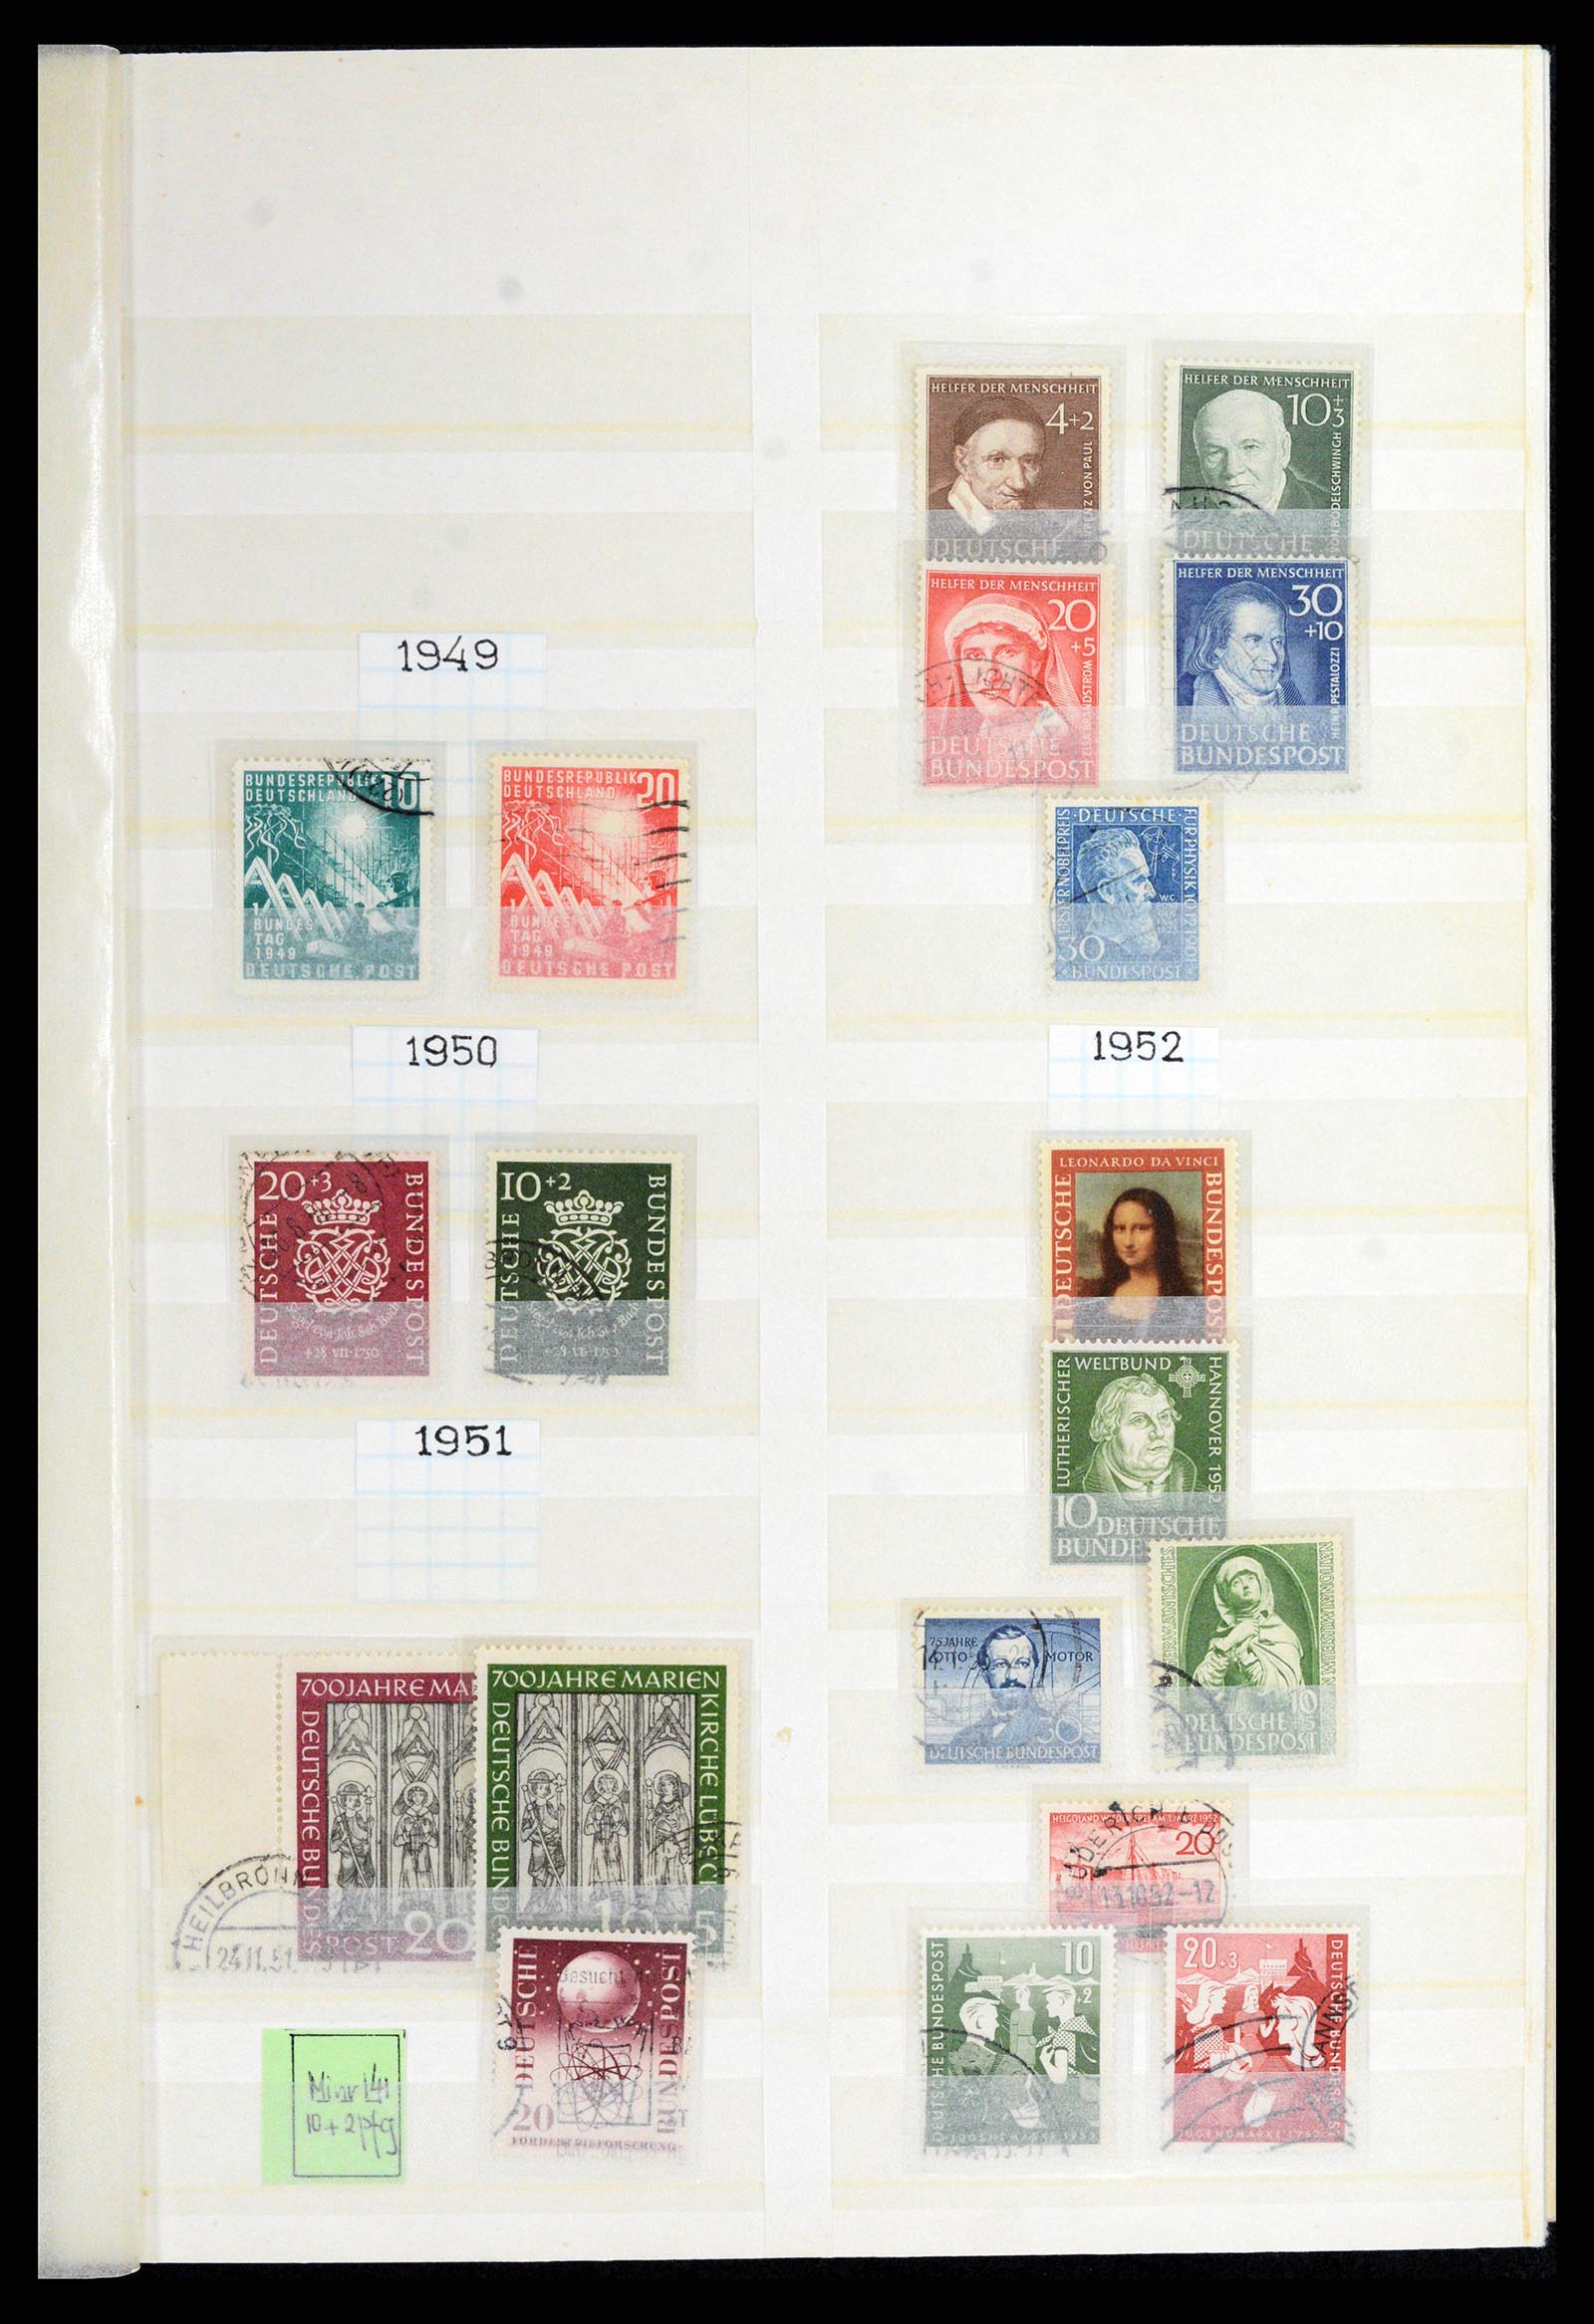 37502 054 - Stamp collection 37502 Bundespost 1949-2000.